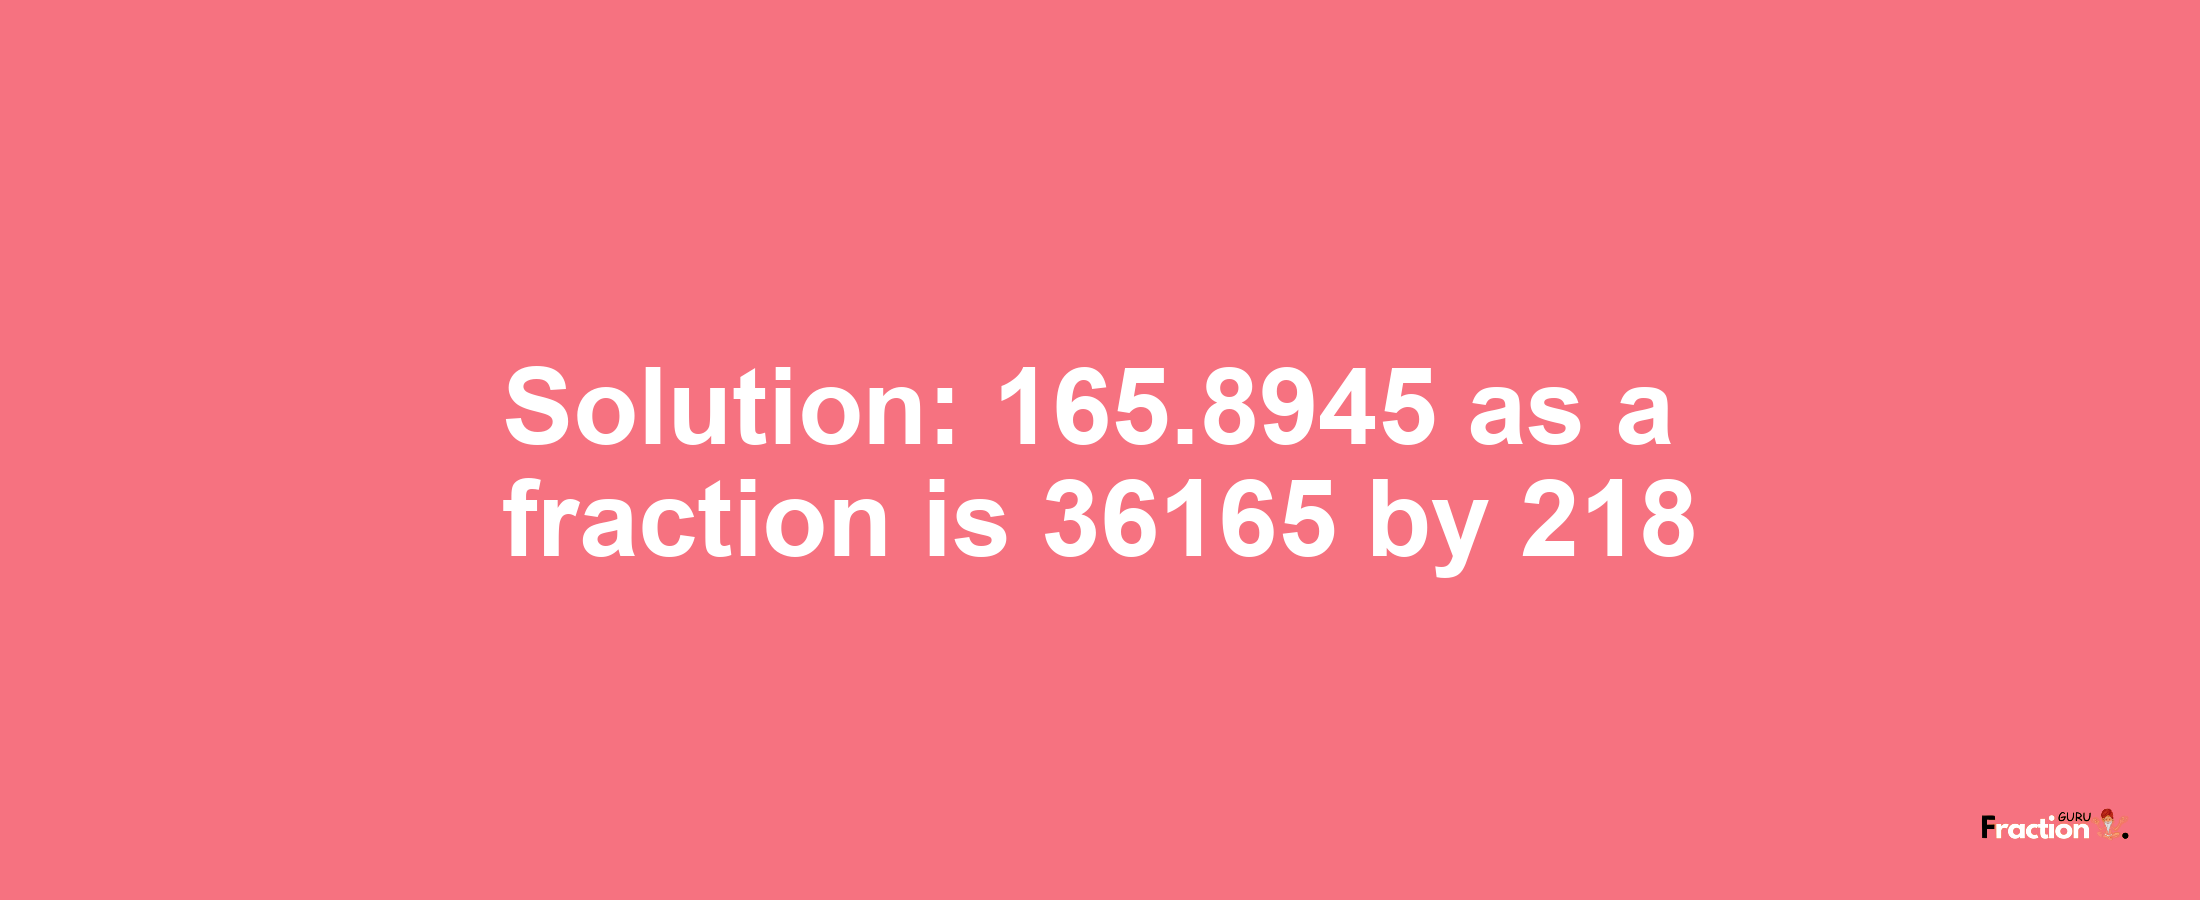 Solution:165.8945 as a fraction is 36165/218